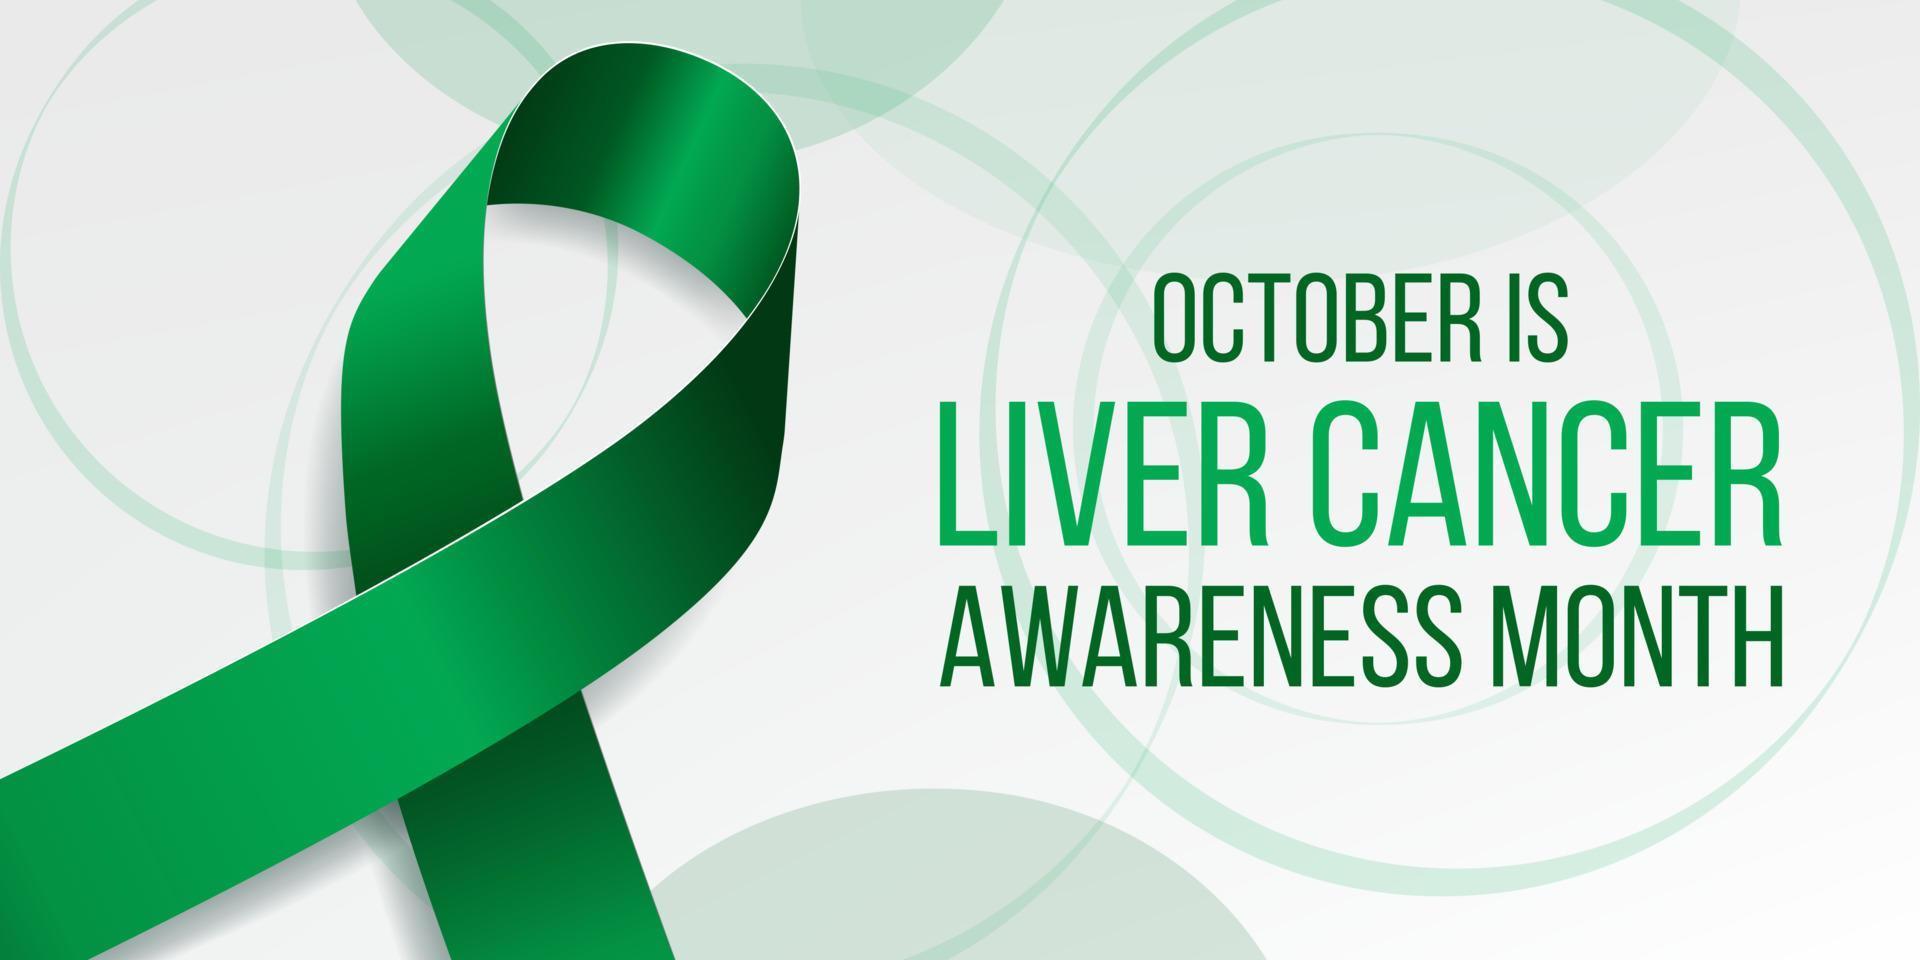 Liver Cancer Awareness Month concept. Banner with emerald green ribbon awareness and text.  Vector illustration.